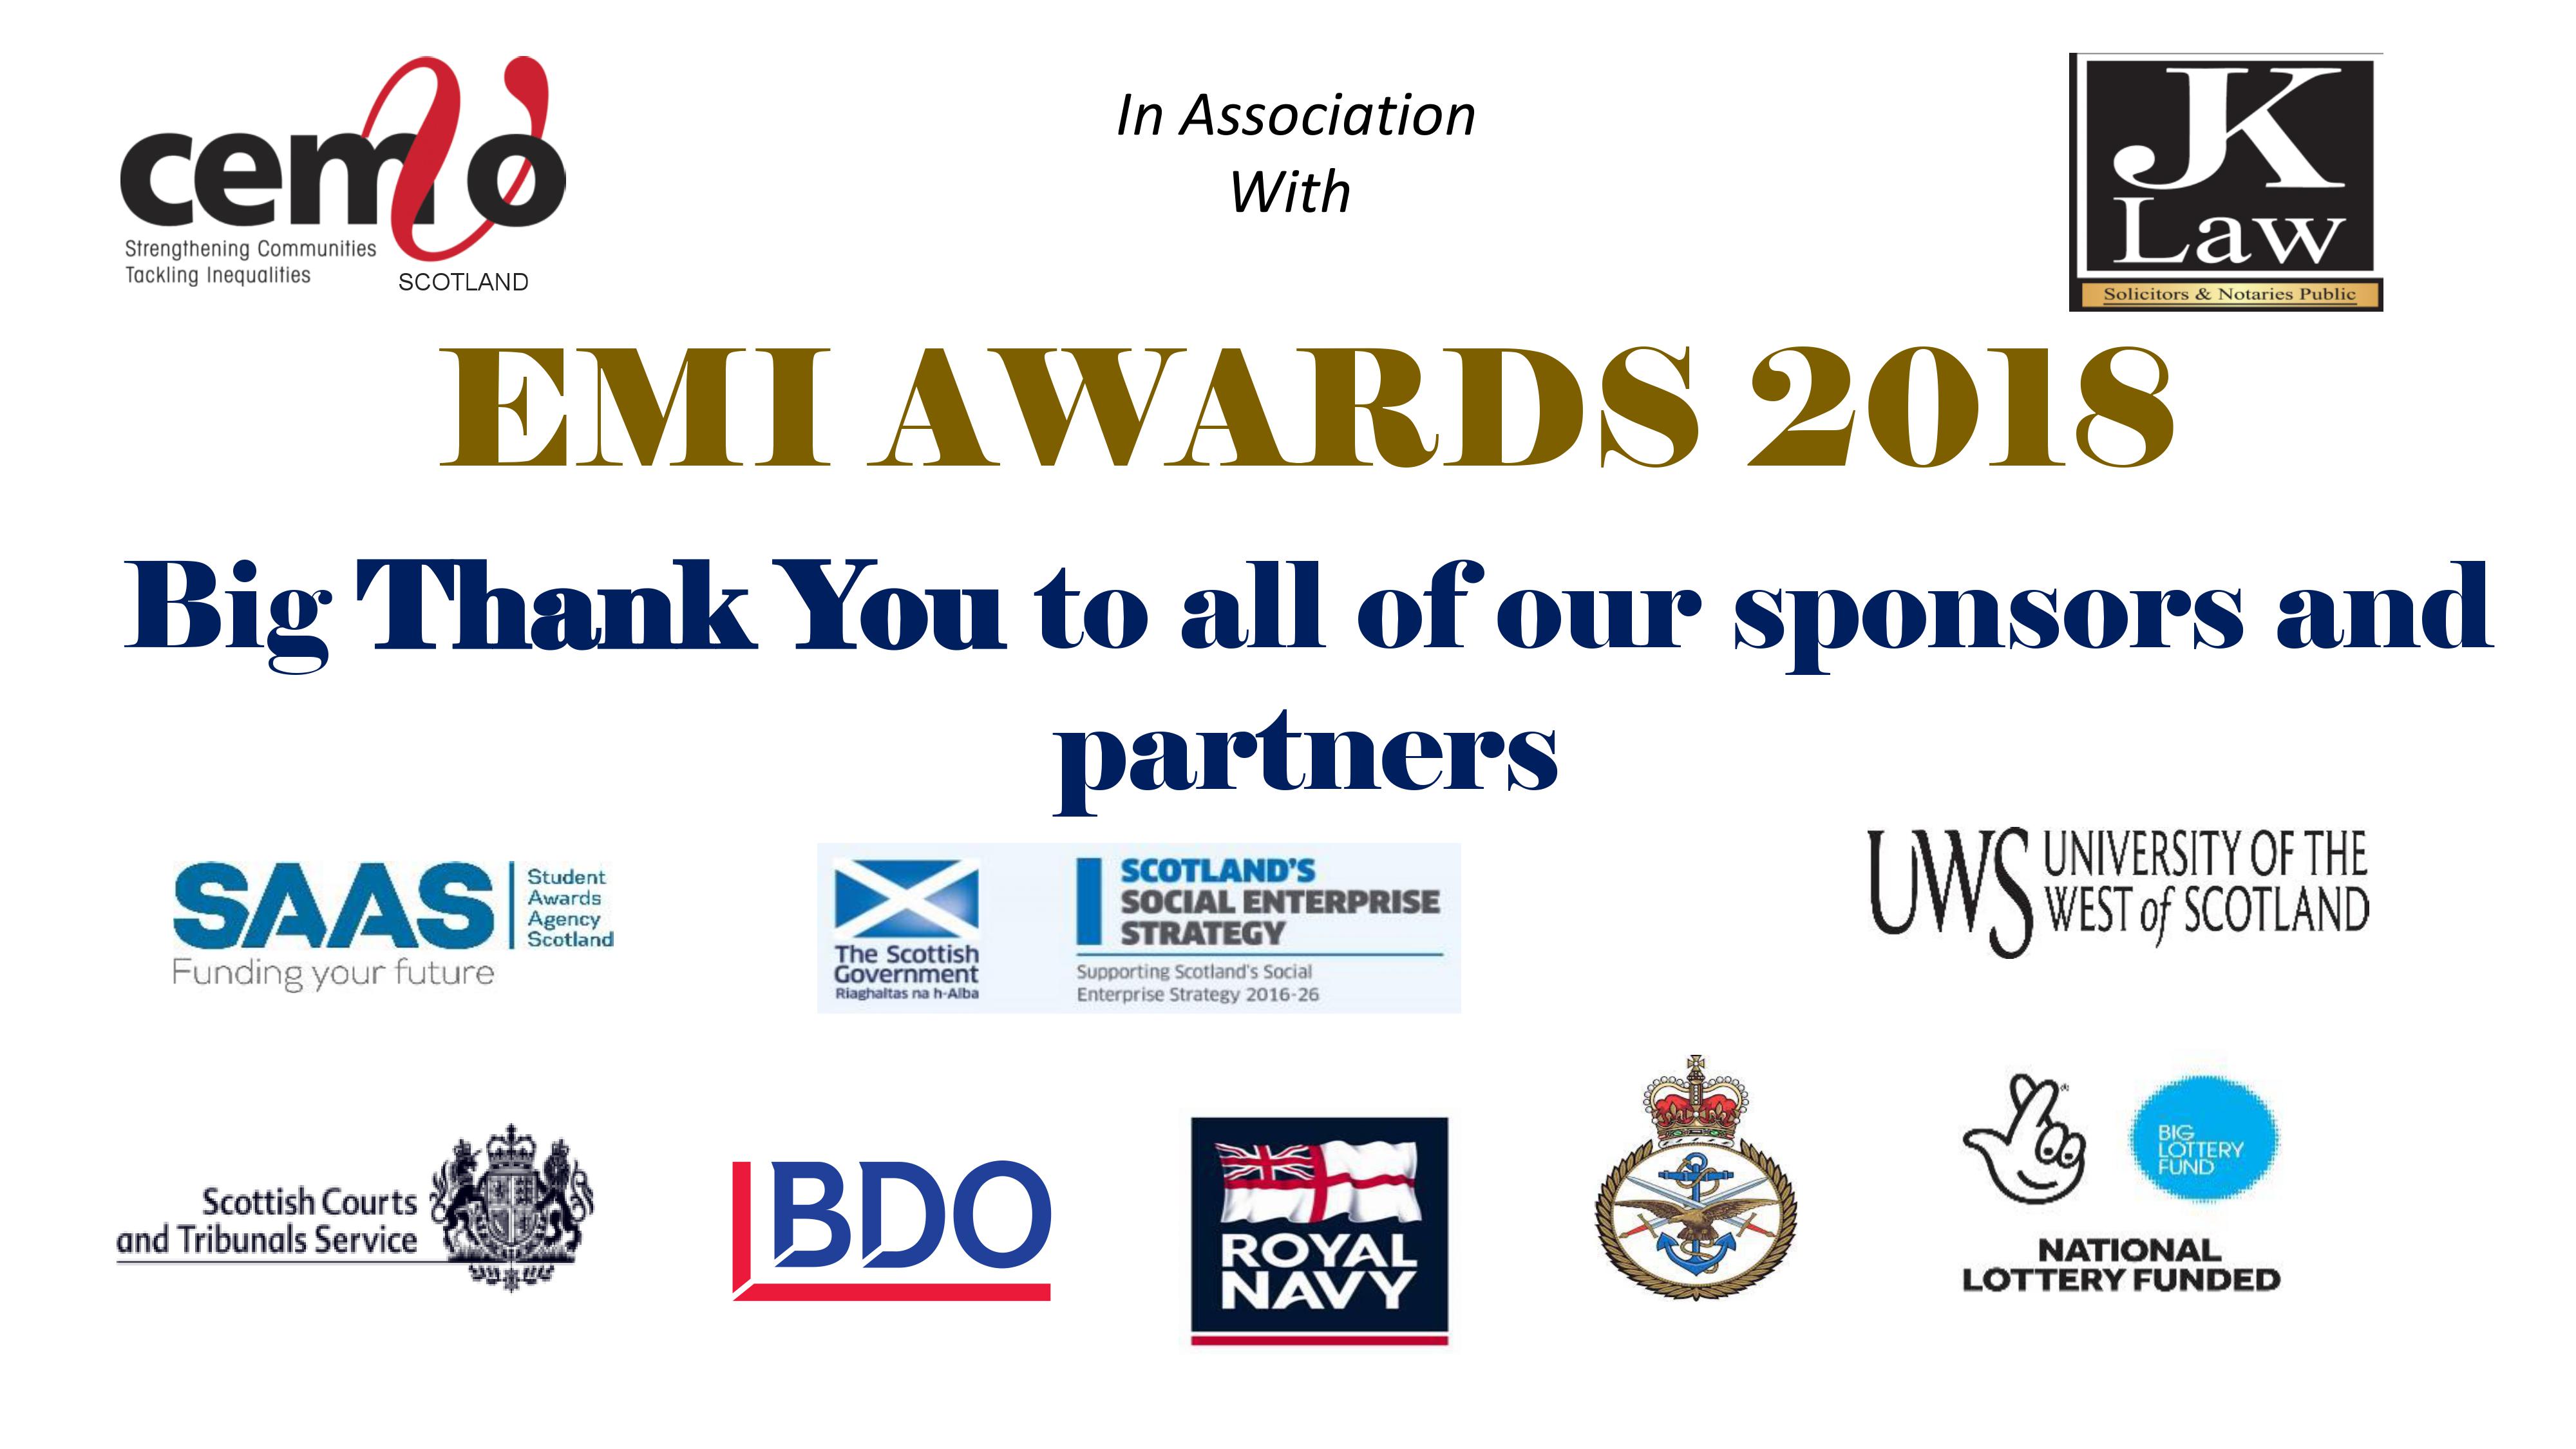 Thank you to our EMIA sponsors and partners!